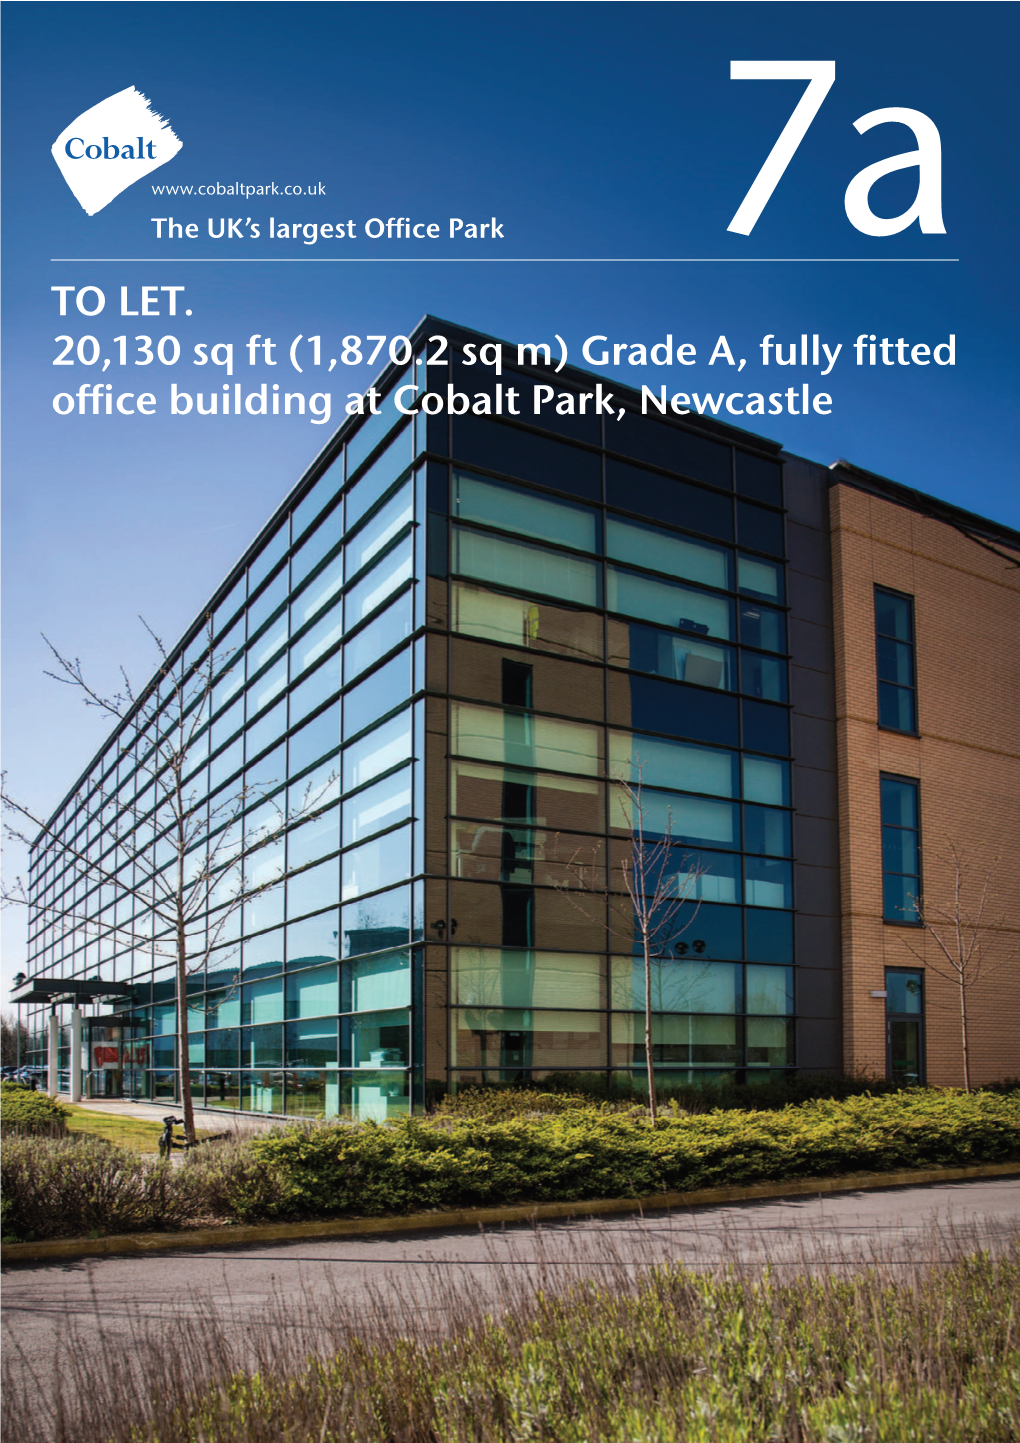 Grade A, Fully Fitted Office Building at Cobalt Park, Newcastle